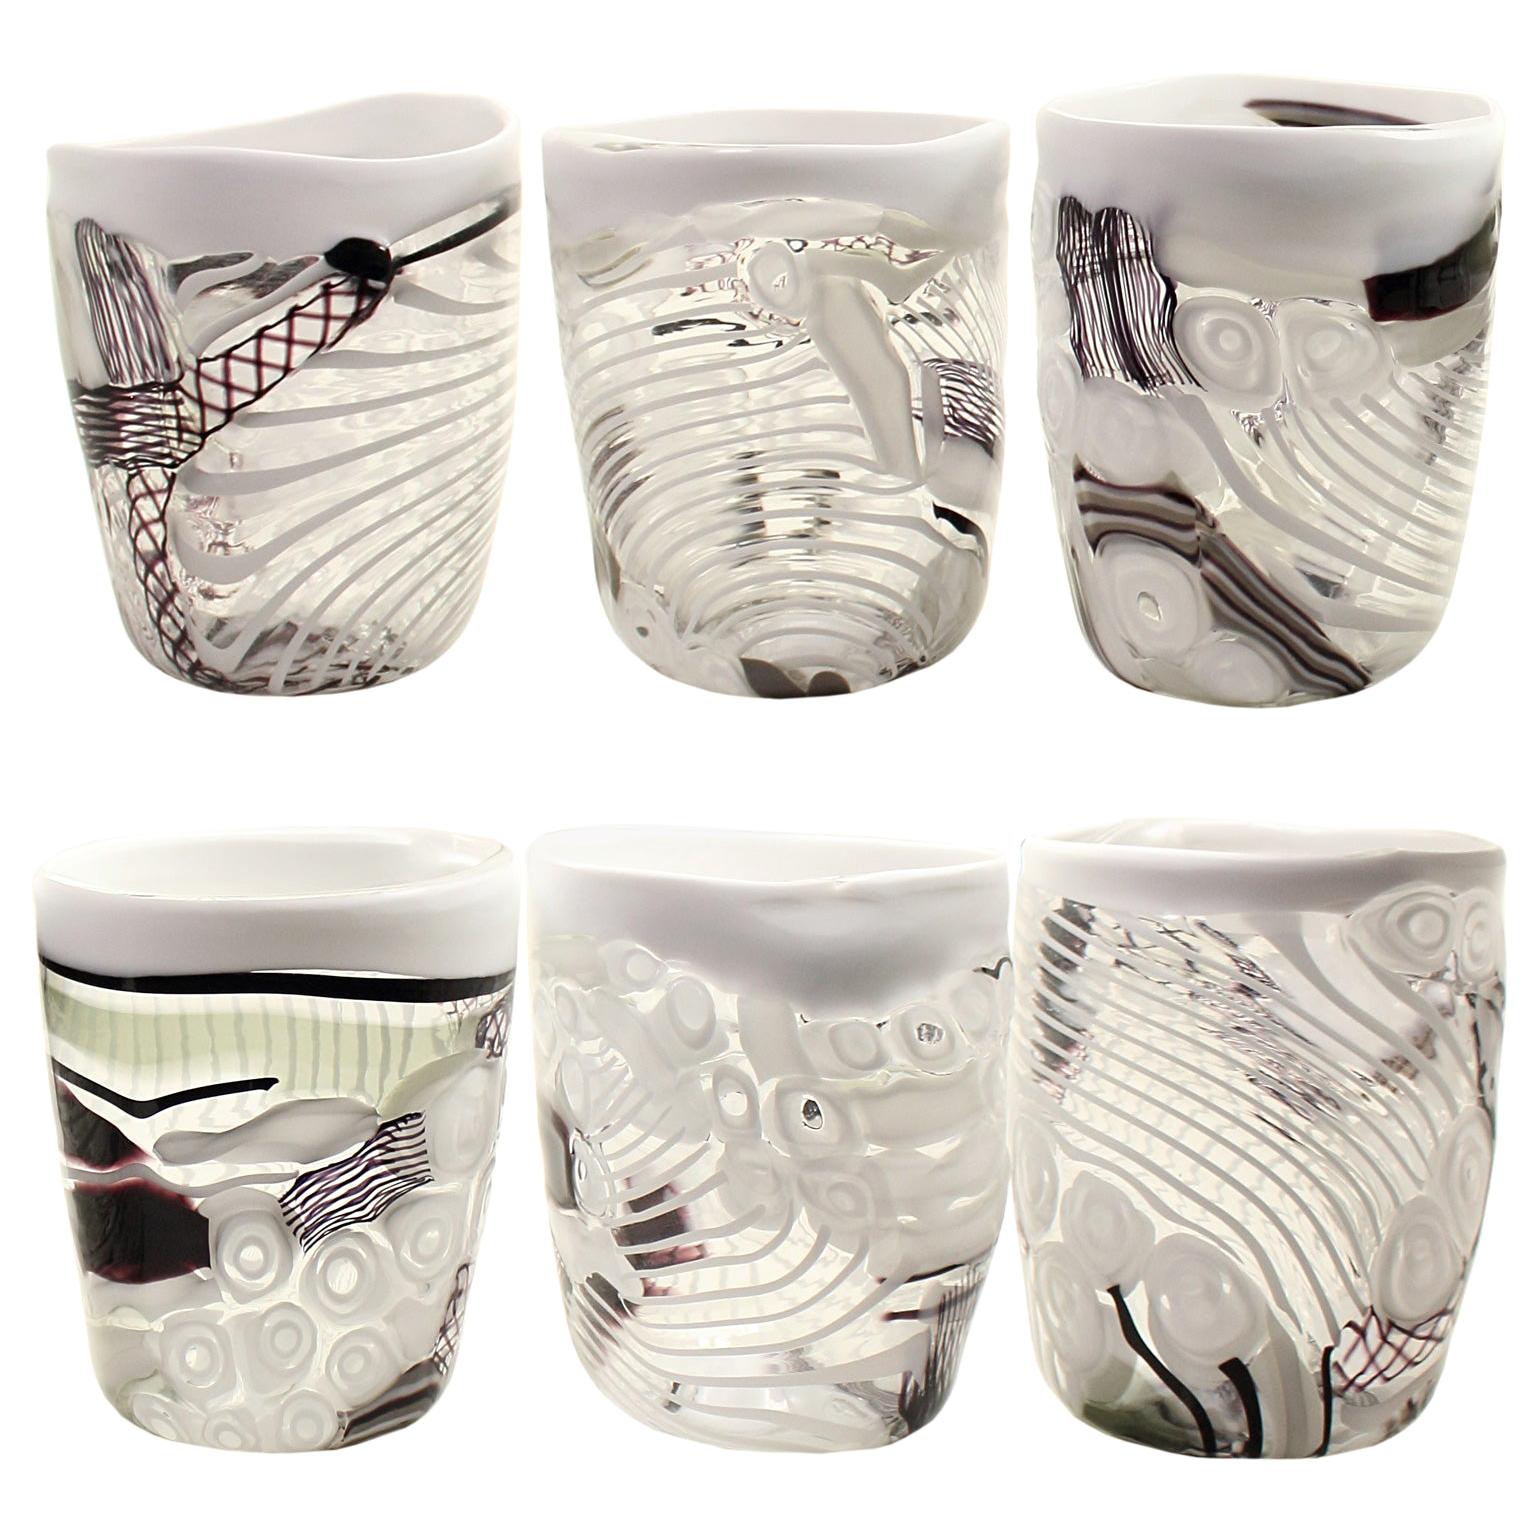 Set of 6 Artistic Handmade Glasses in Murano Glass Inspiration by Multiforme